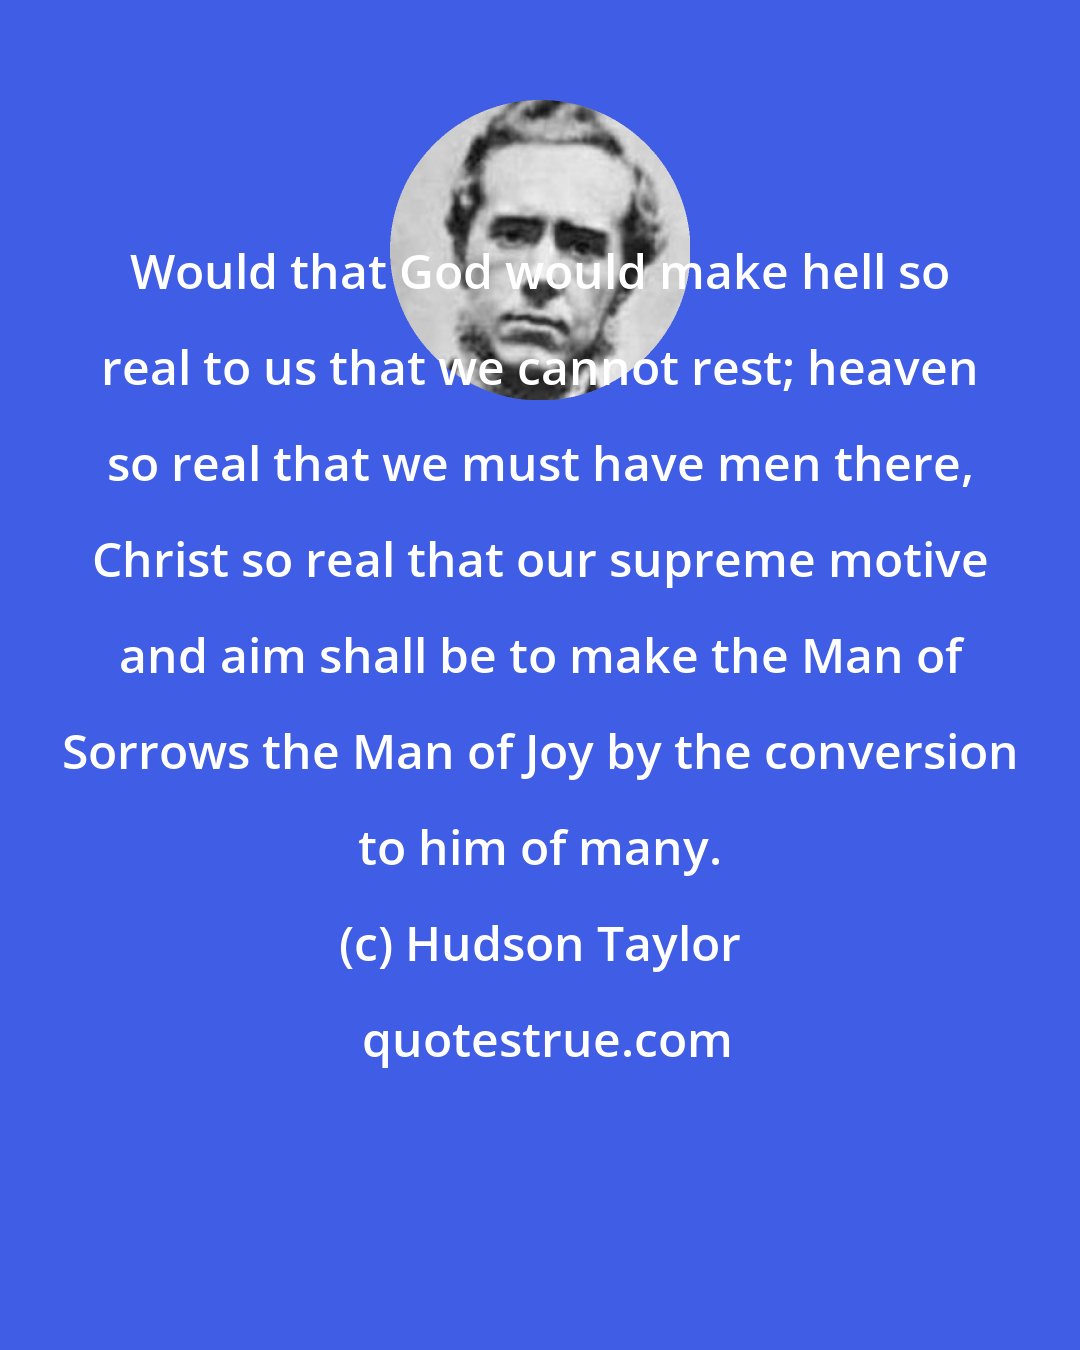 Hudson Taylor: Would that God would make hell so real to us that we cannot rest; heaven so real that we must have men there, Christ so real that our supreme motive and aim shall be to make the Man of Sorrows the Man of Joy by the conversion to him of many.